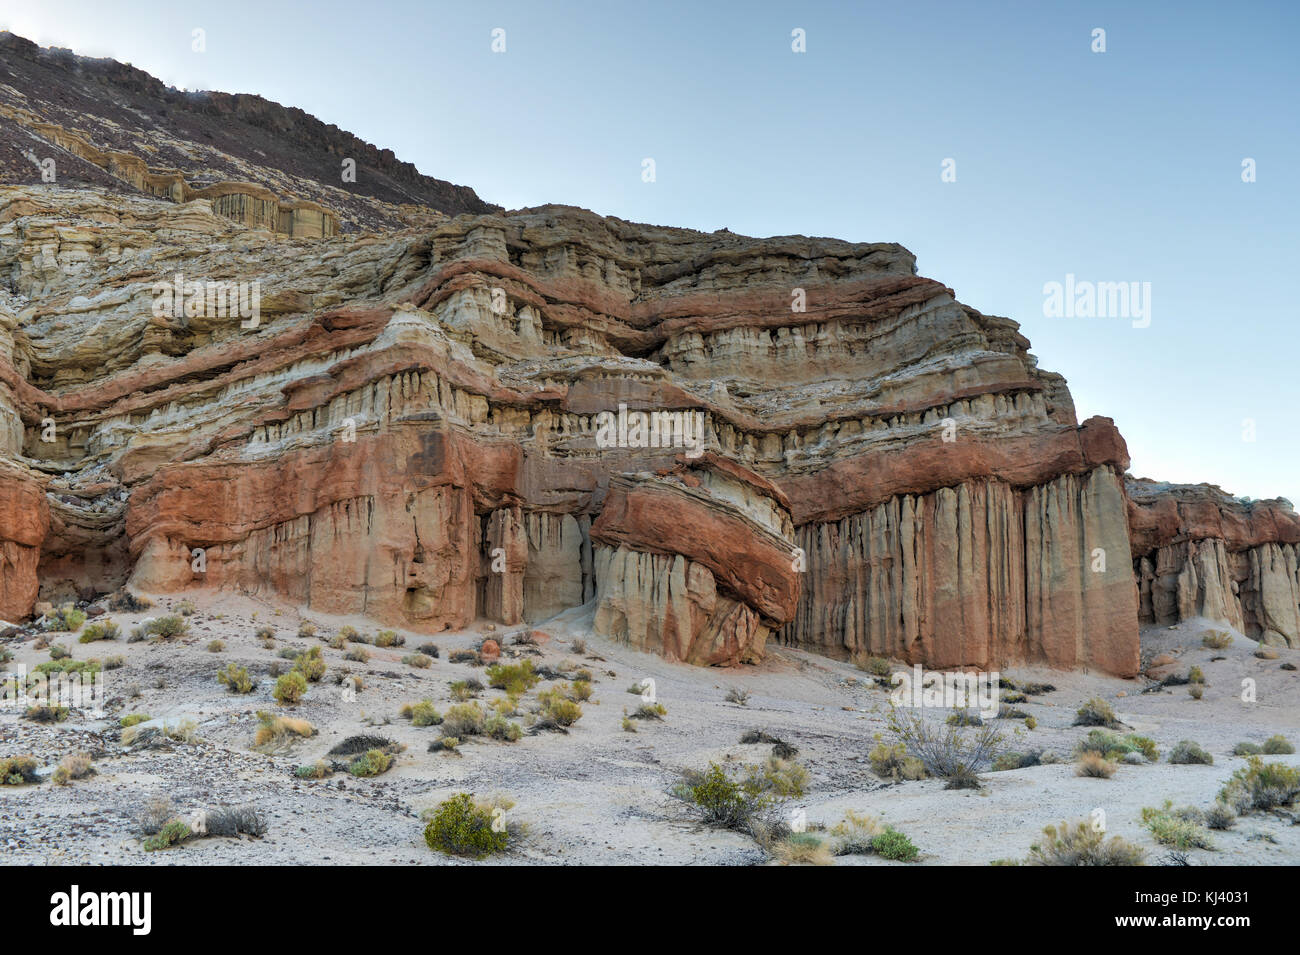 Red Rock Canyon State Park in Kern County, California, USA, featuring scenic desert cliffs, buttes and spectacular rock formations. The park is locate Stock Photo